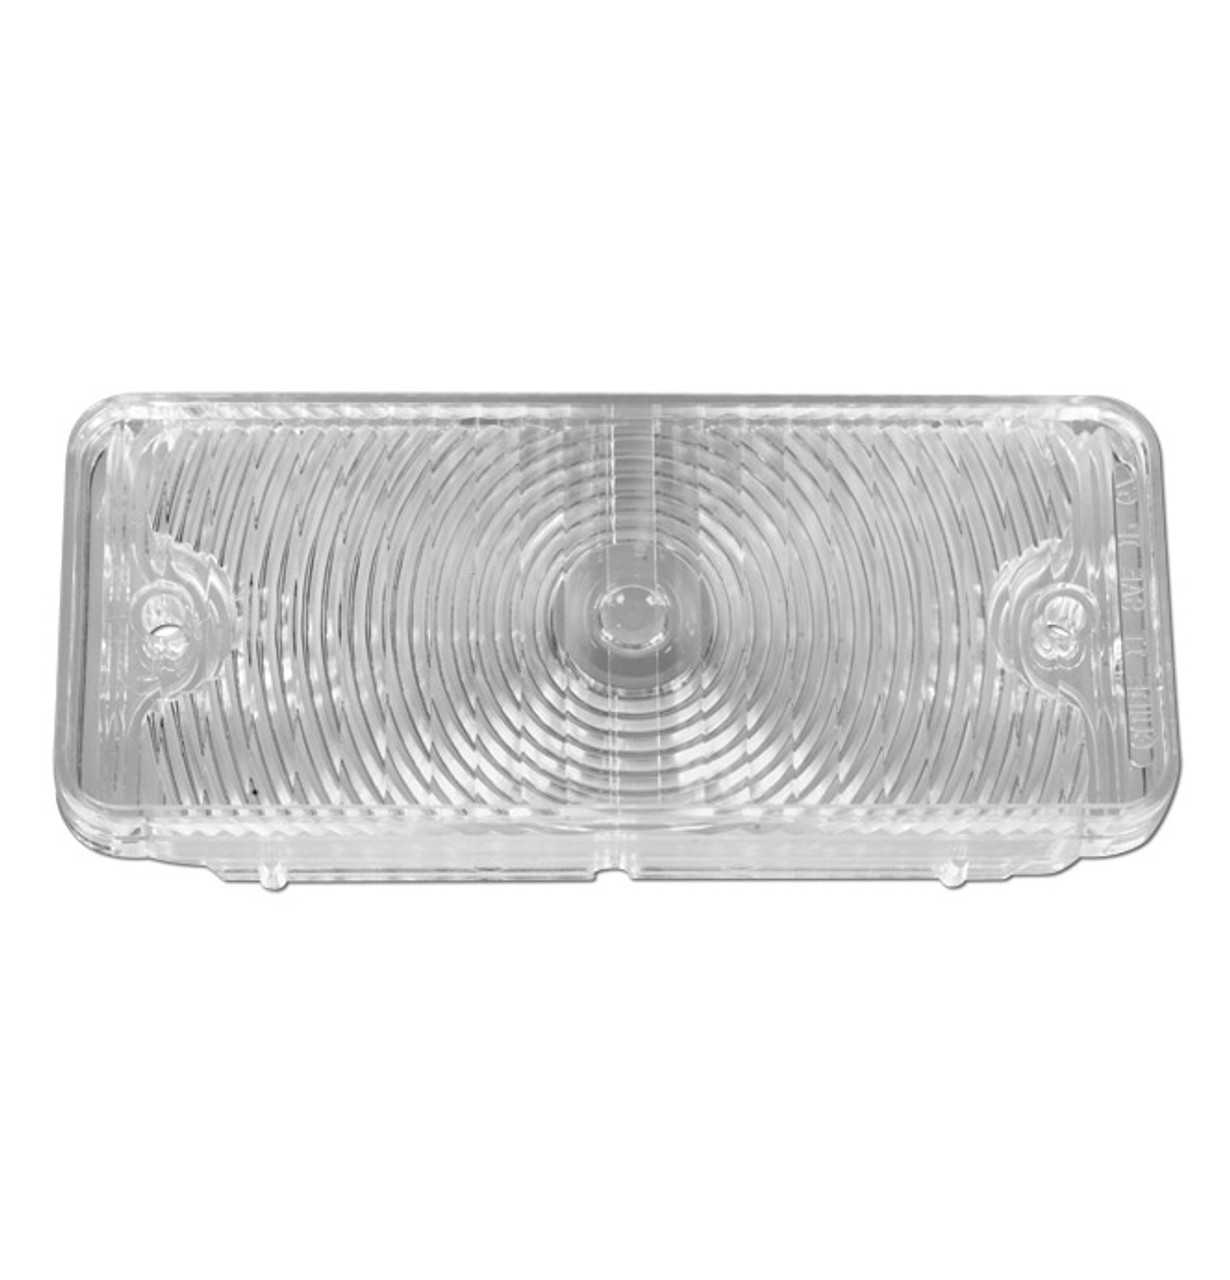 1967-1968 Chevy Truck Parklight Lens R/H, Clear